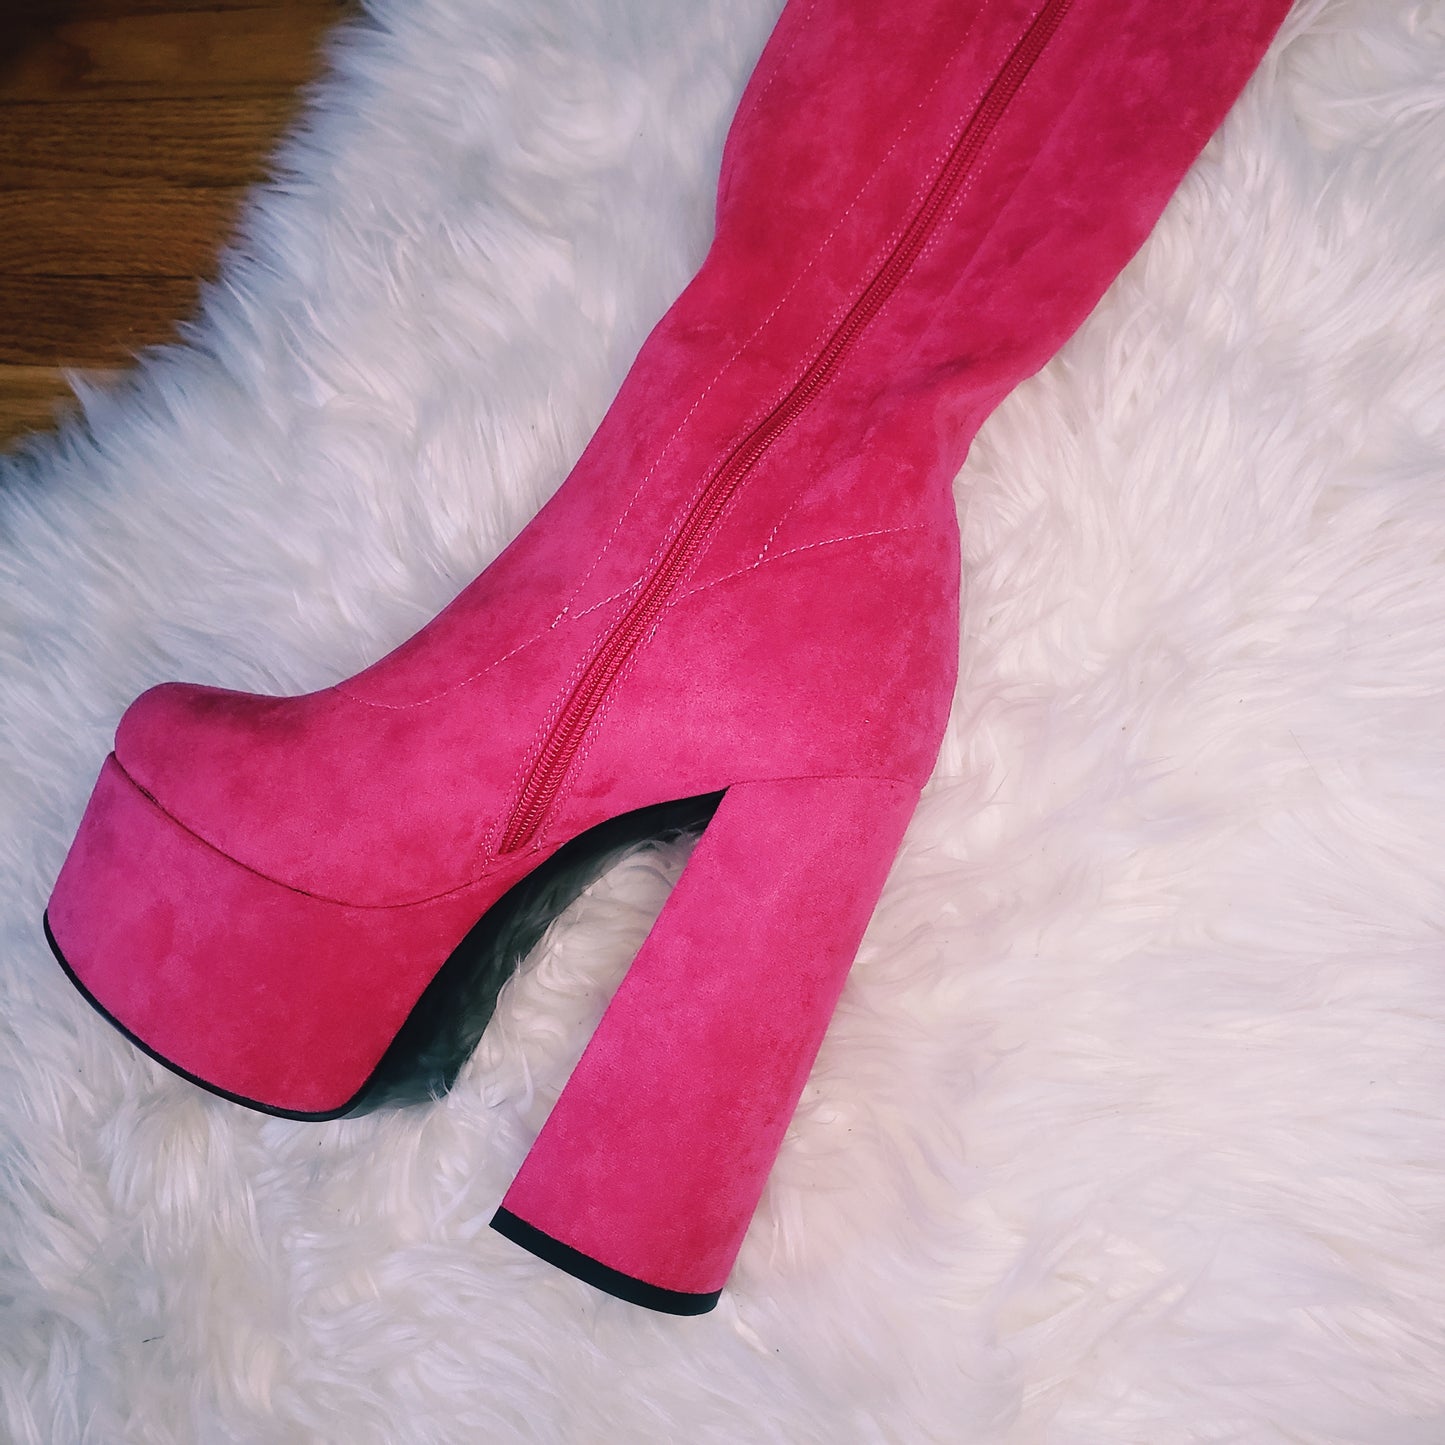 Pink suede retro chunky platform boots. Round toe and block heel give it a 60's and 70's inspired twist. Knee high suede boots. 